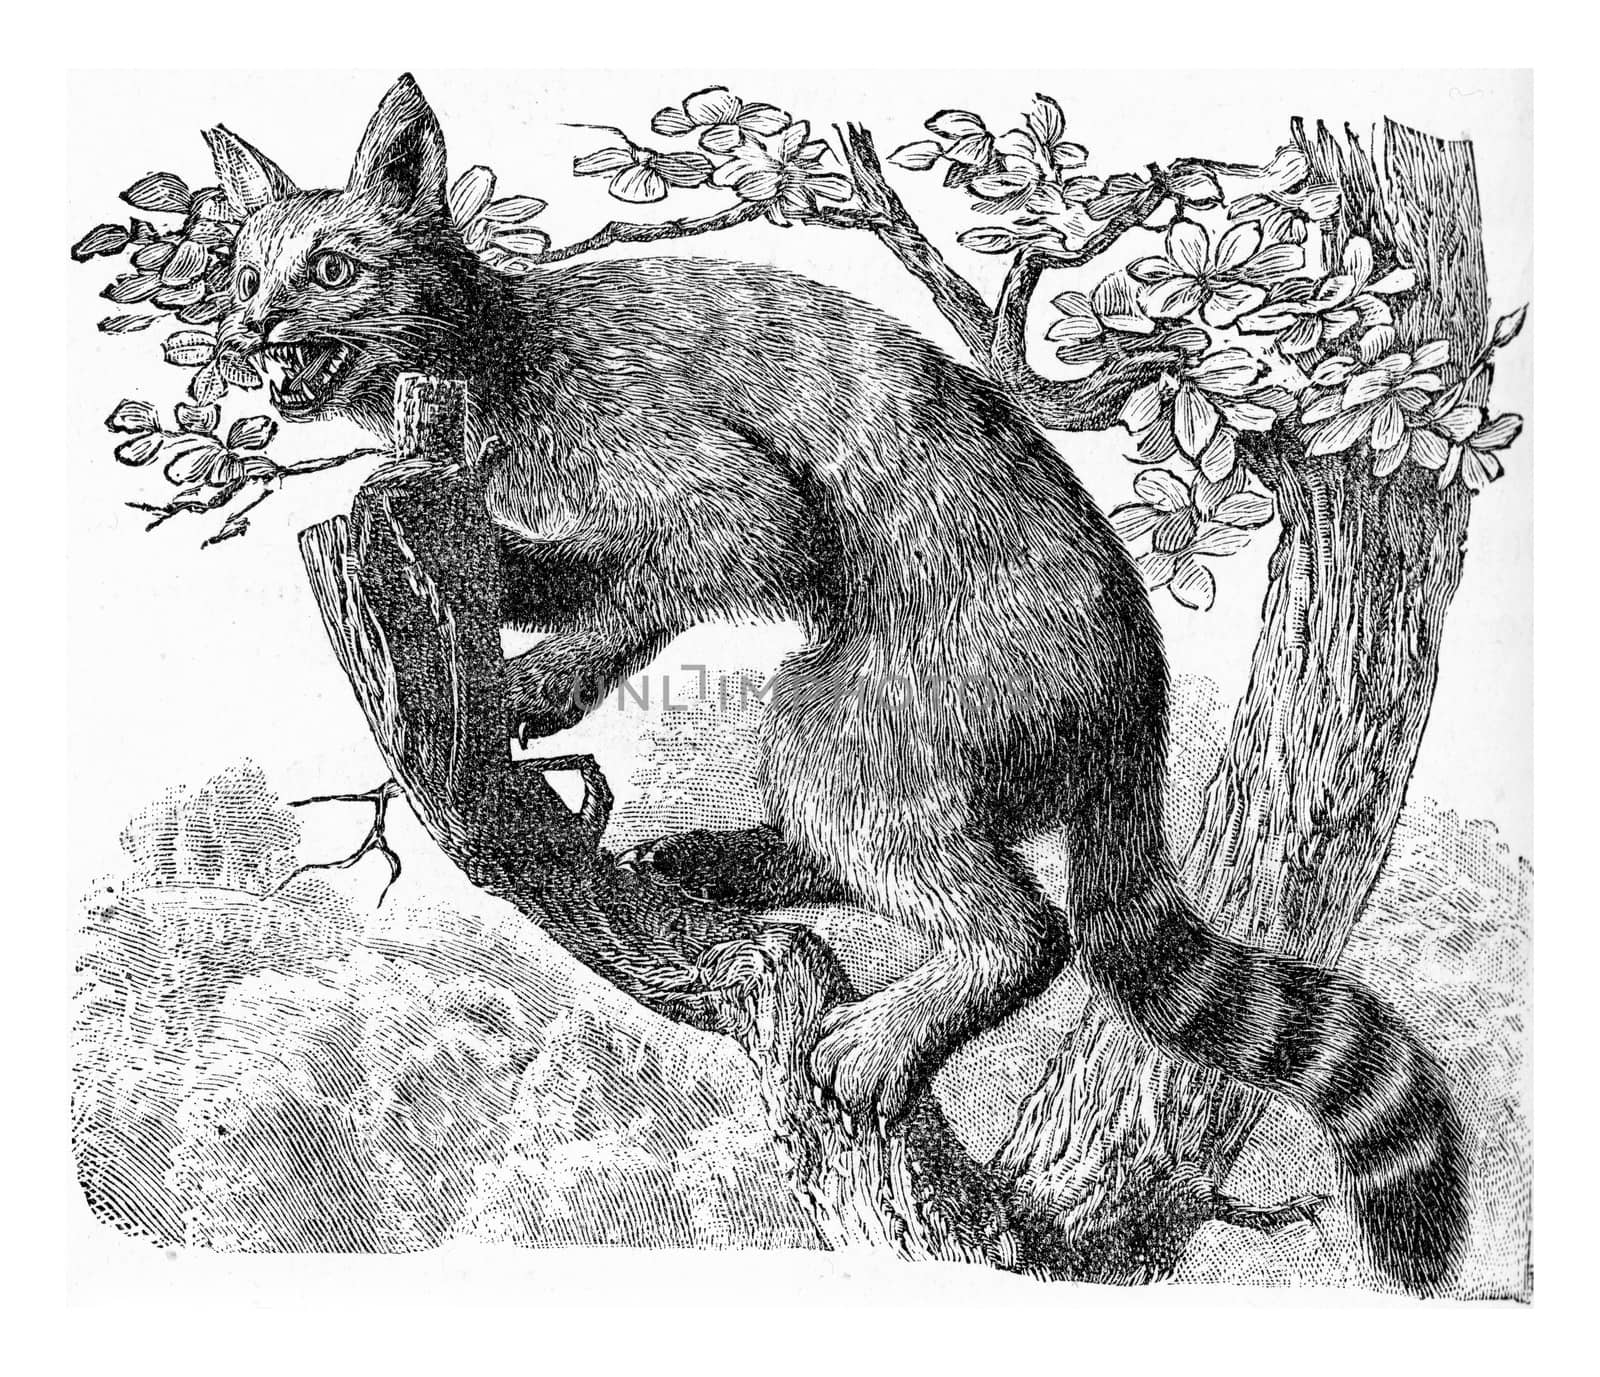 The wildcat, vintage engraved illustration. From Deutch Vogel Teaching in Zoology.
